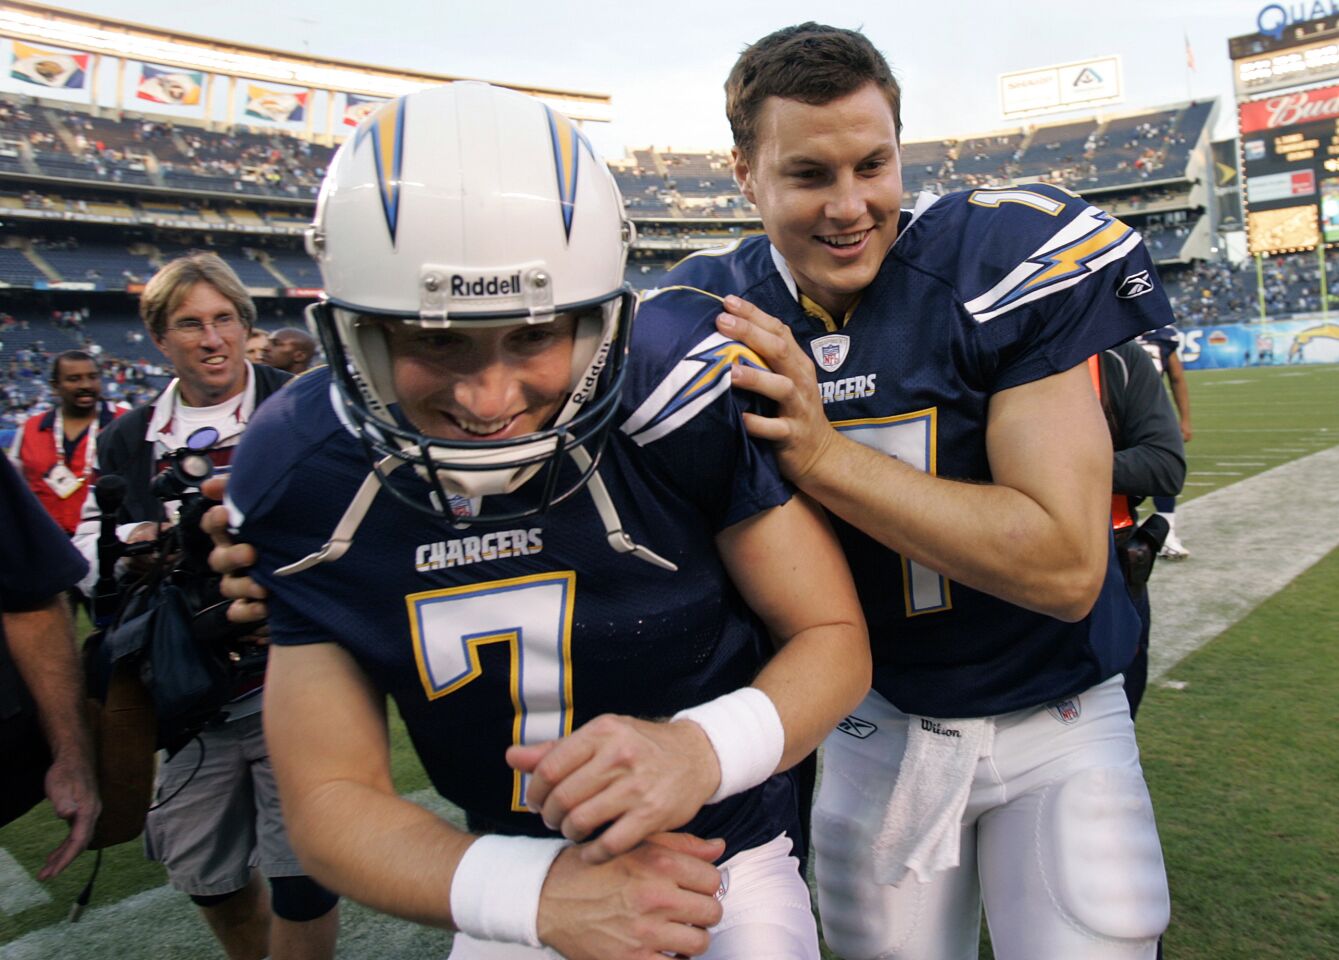 Philip Rivers and Billy Volek of the San Diego Chargers celebrate a 51-14 win against the Detroit Lions on December 16, 2007 at Qualcomm Stadium.